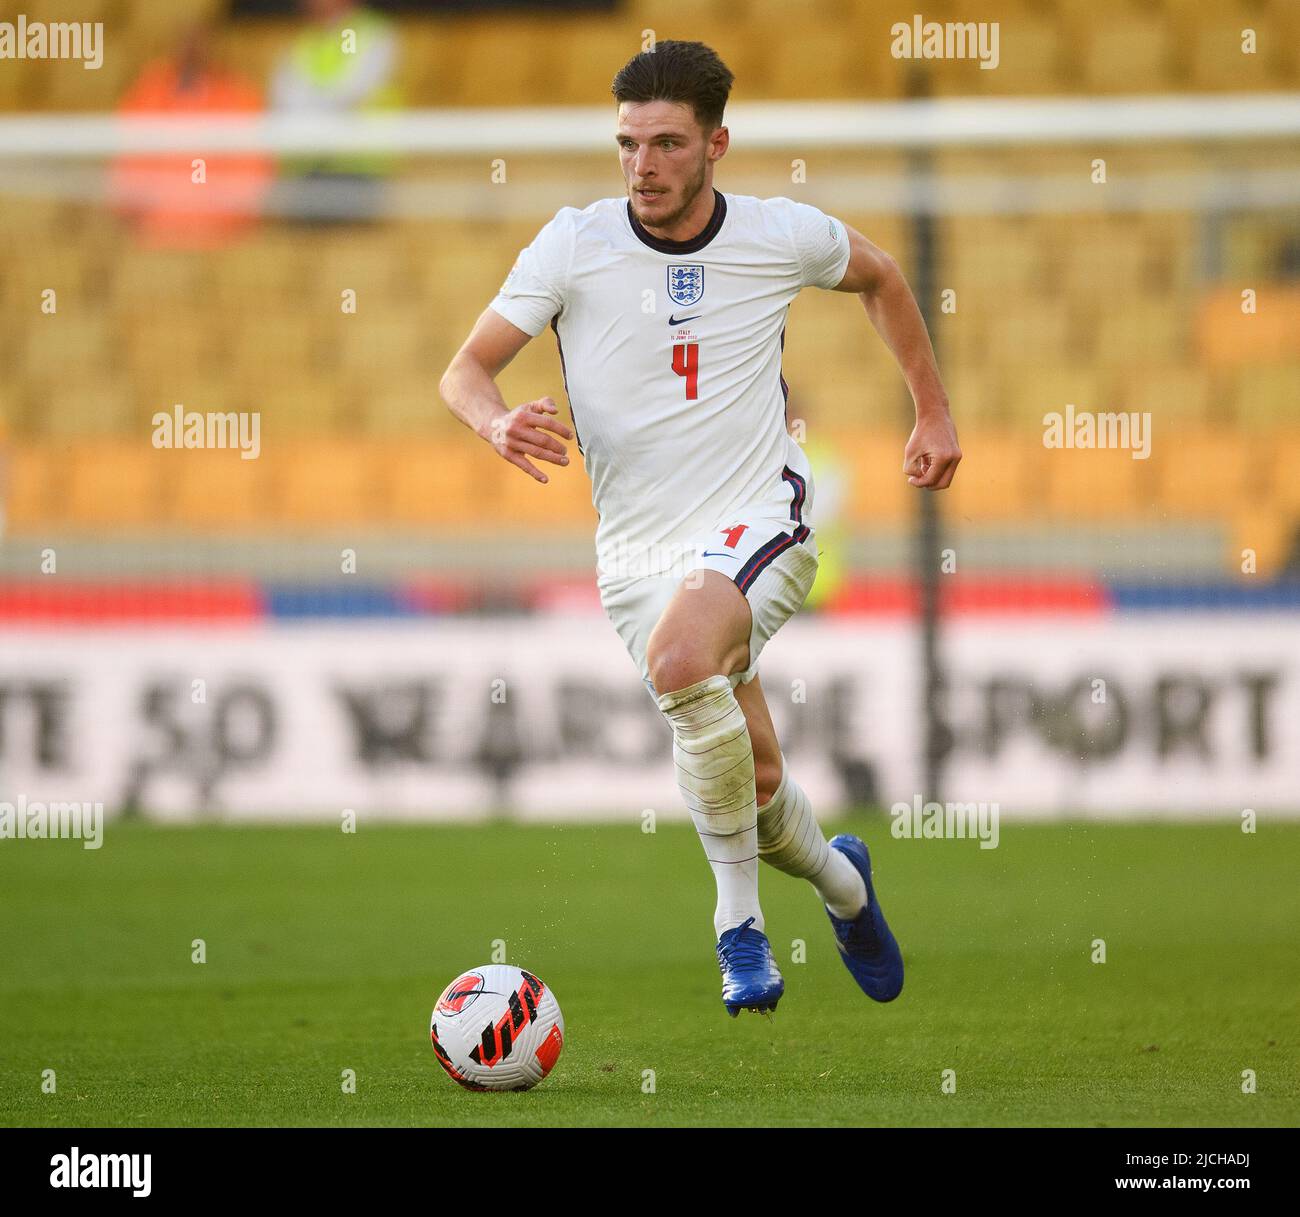 11 Jun 2022 - England v Italy - UEFA Nations League - Group 3 - Molineux Stadium  England's Declan Rice during the match against Italy. Picture Credit : © Mark Pain / Alamy Live News Stock Photo